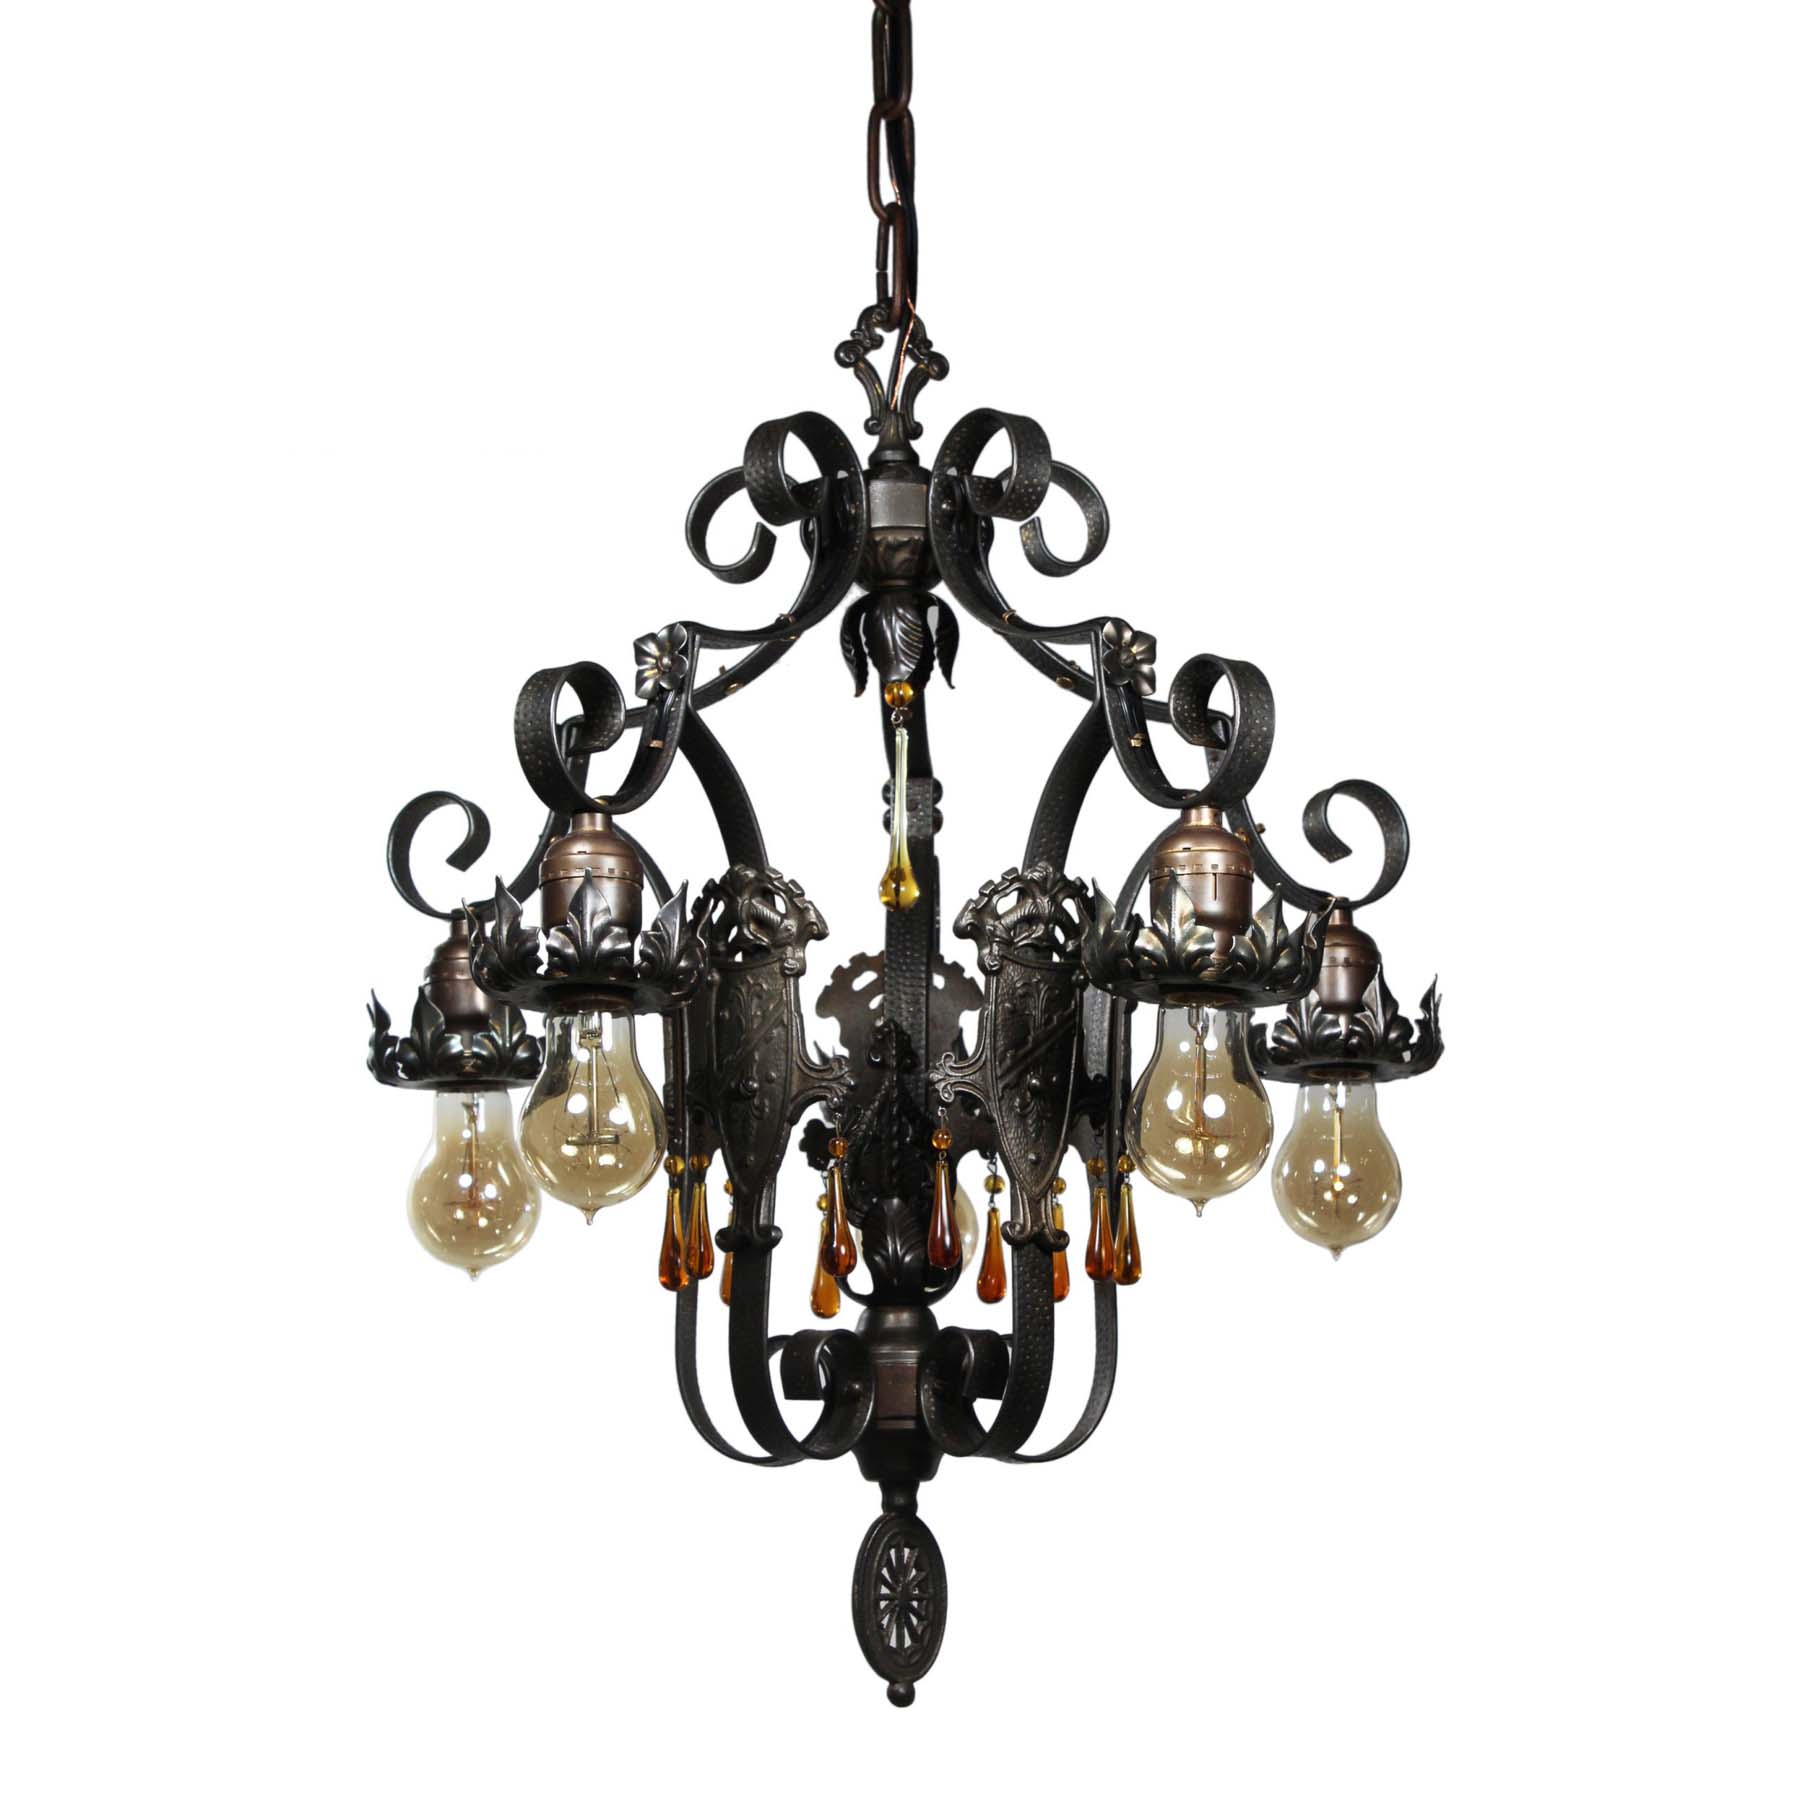 Antique Spanish Revival Five-Light Iron Chandelier, Early 1900s-0